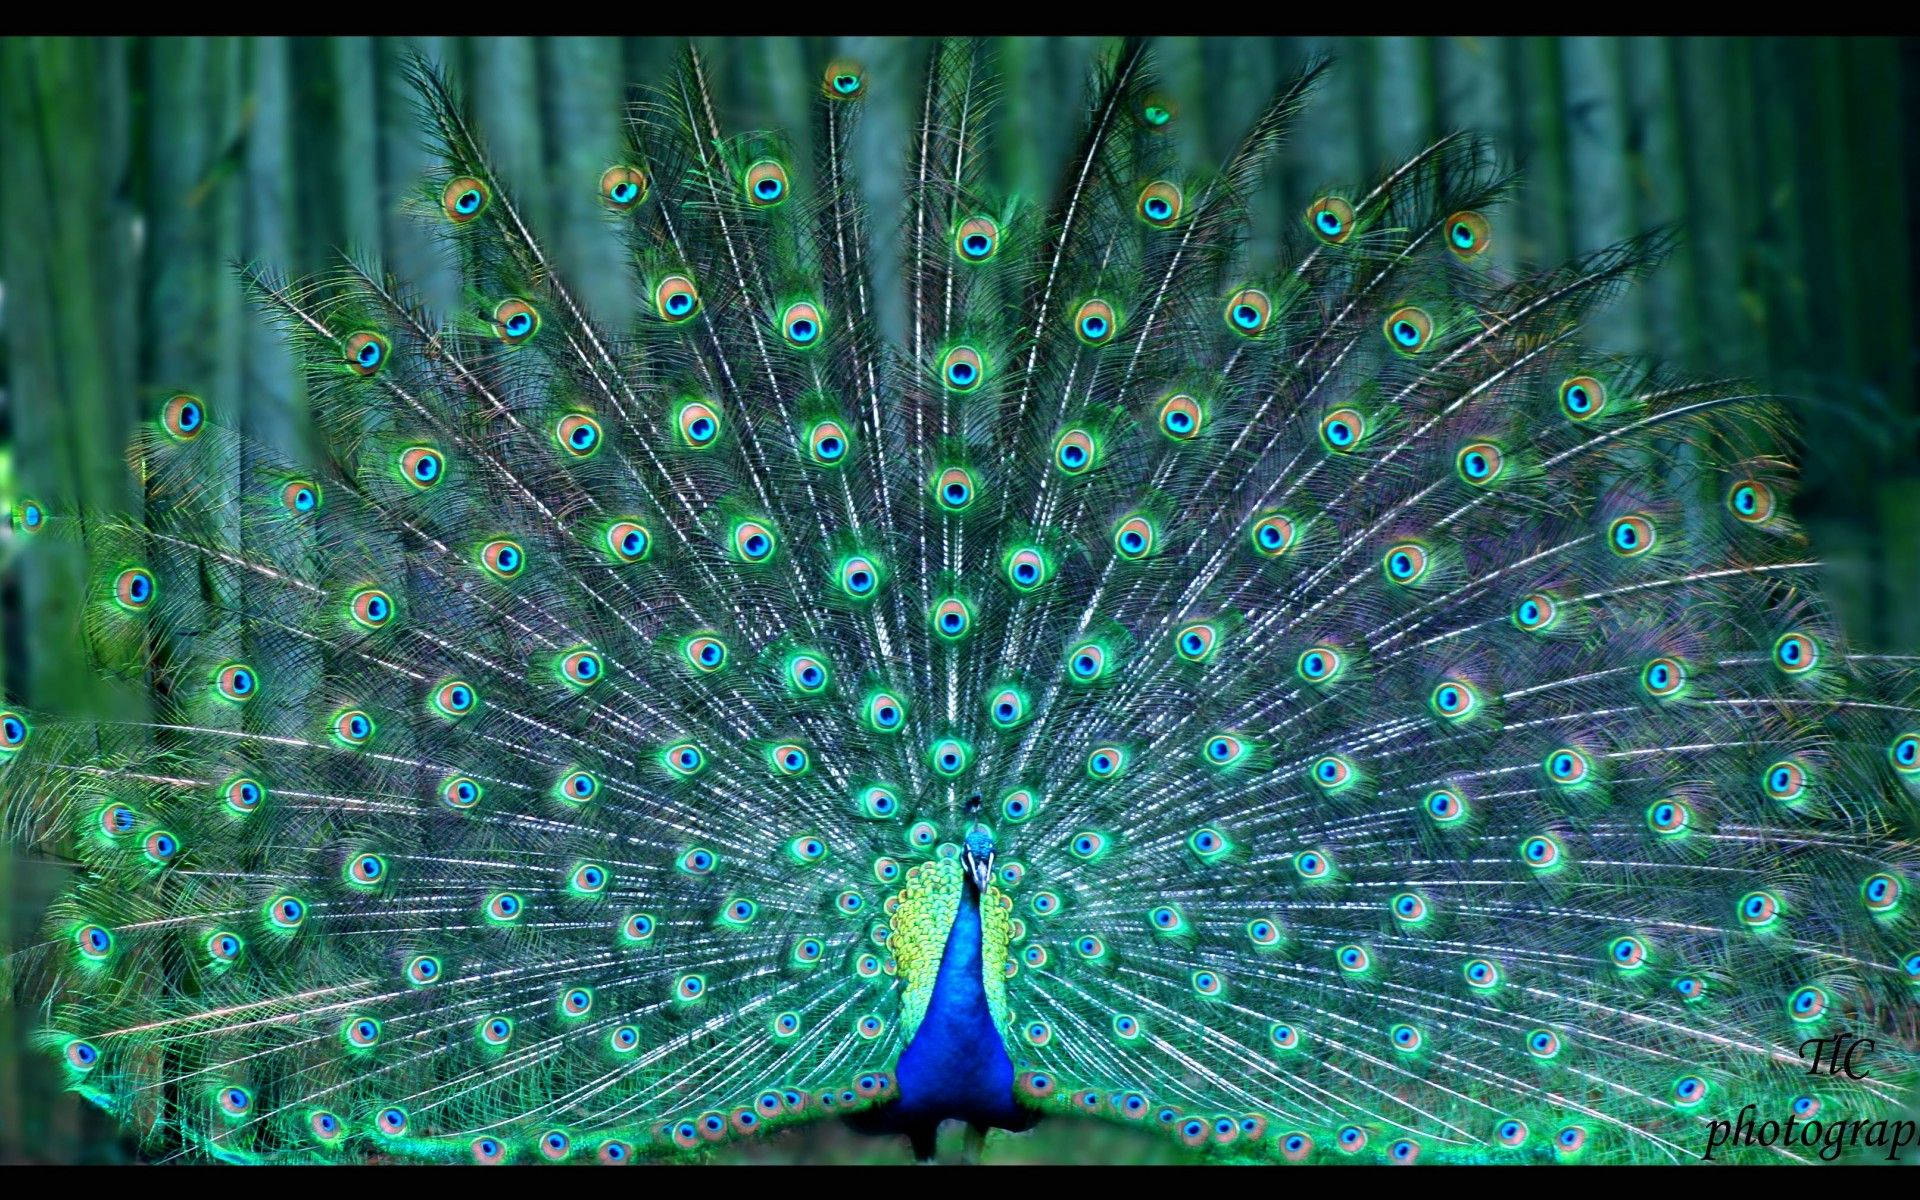 Perfectly Fanned-Out Tail Of Peacock Wallpaper